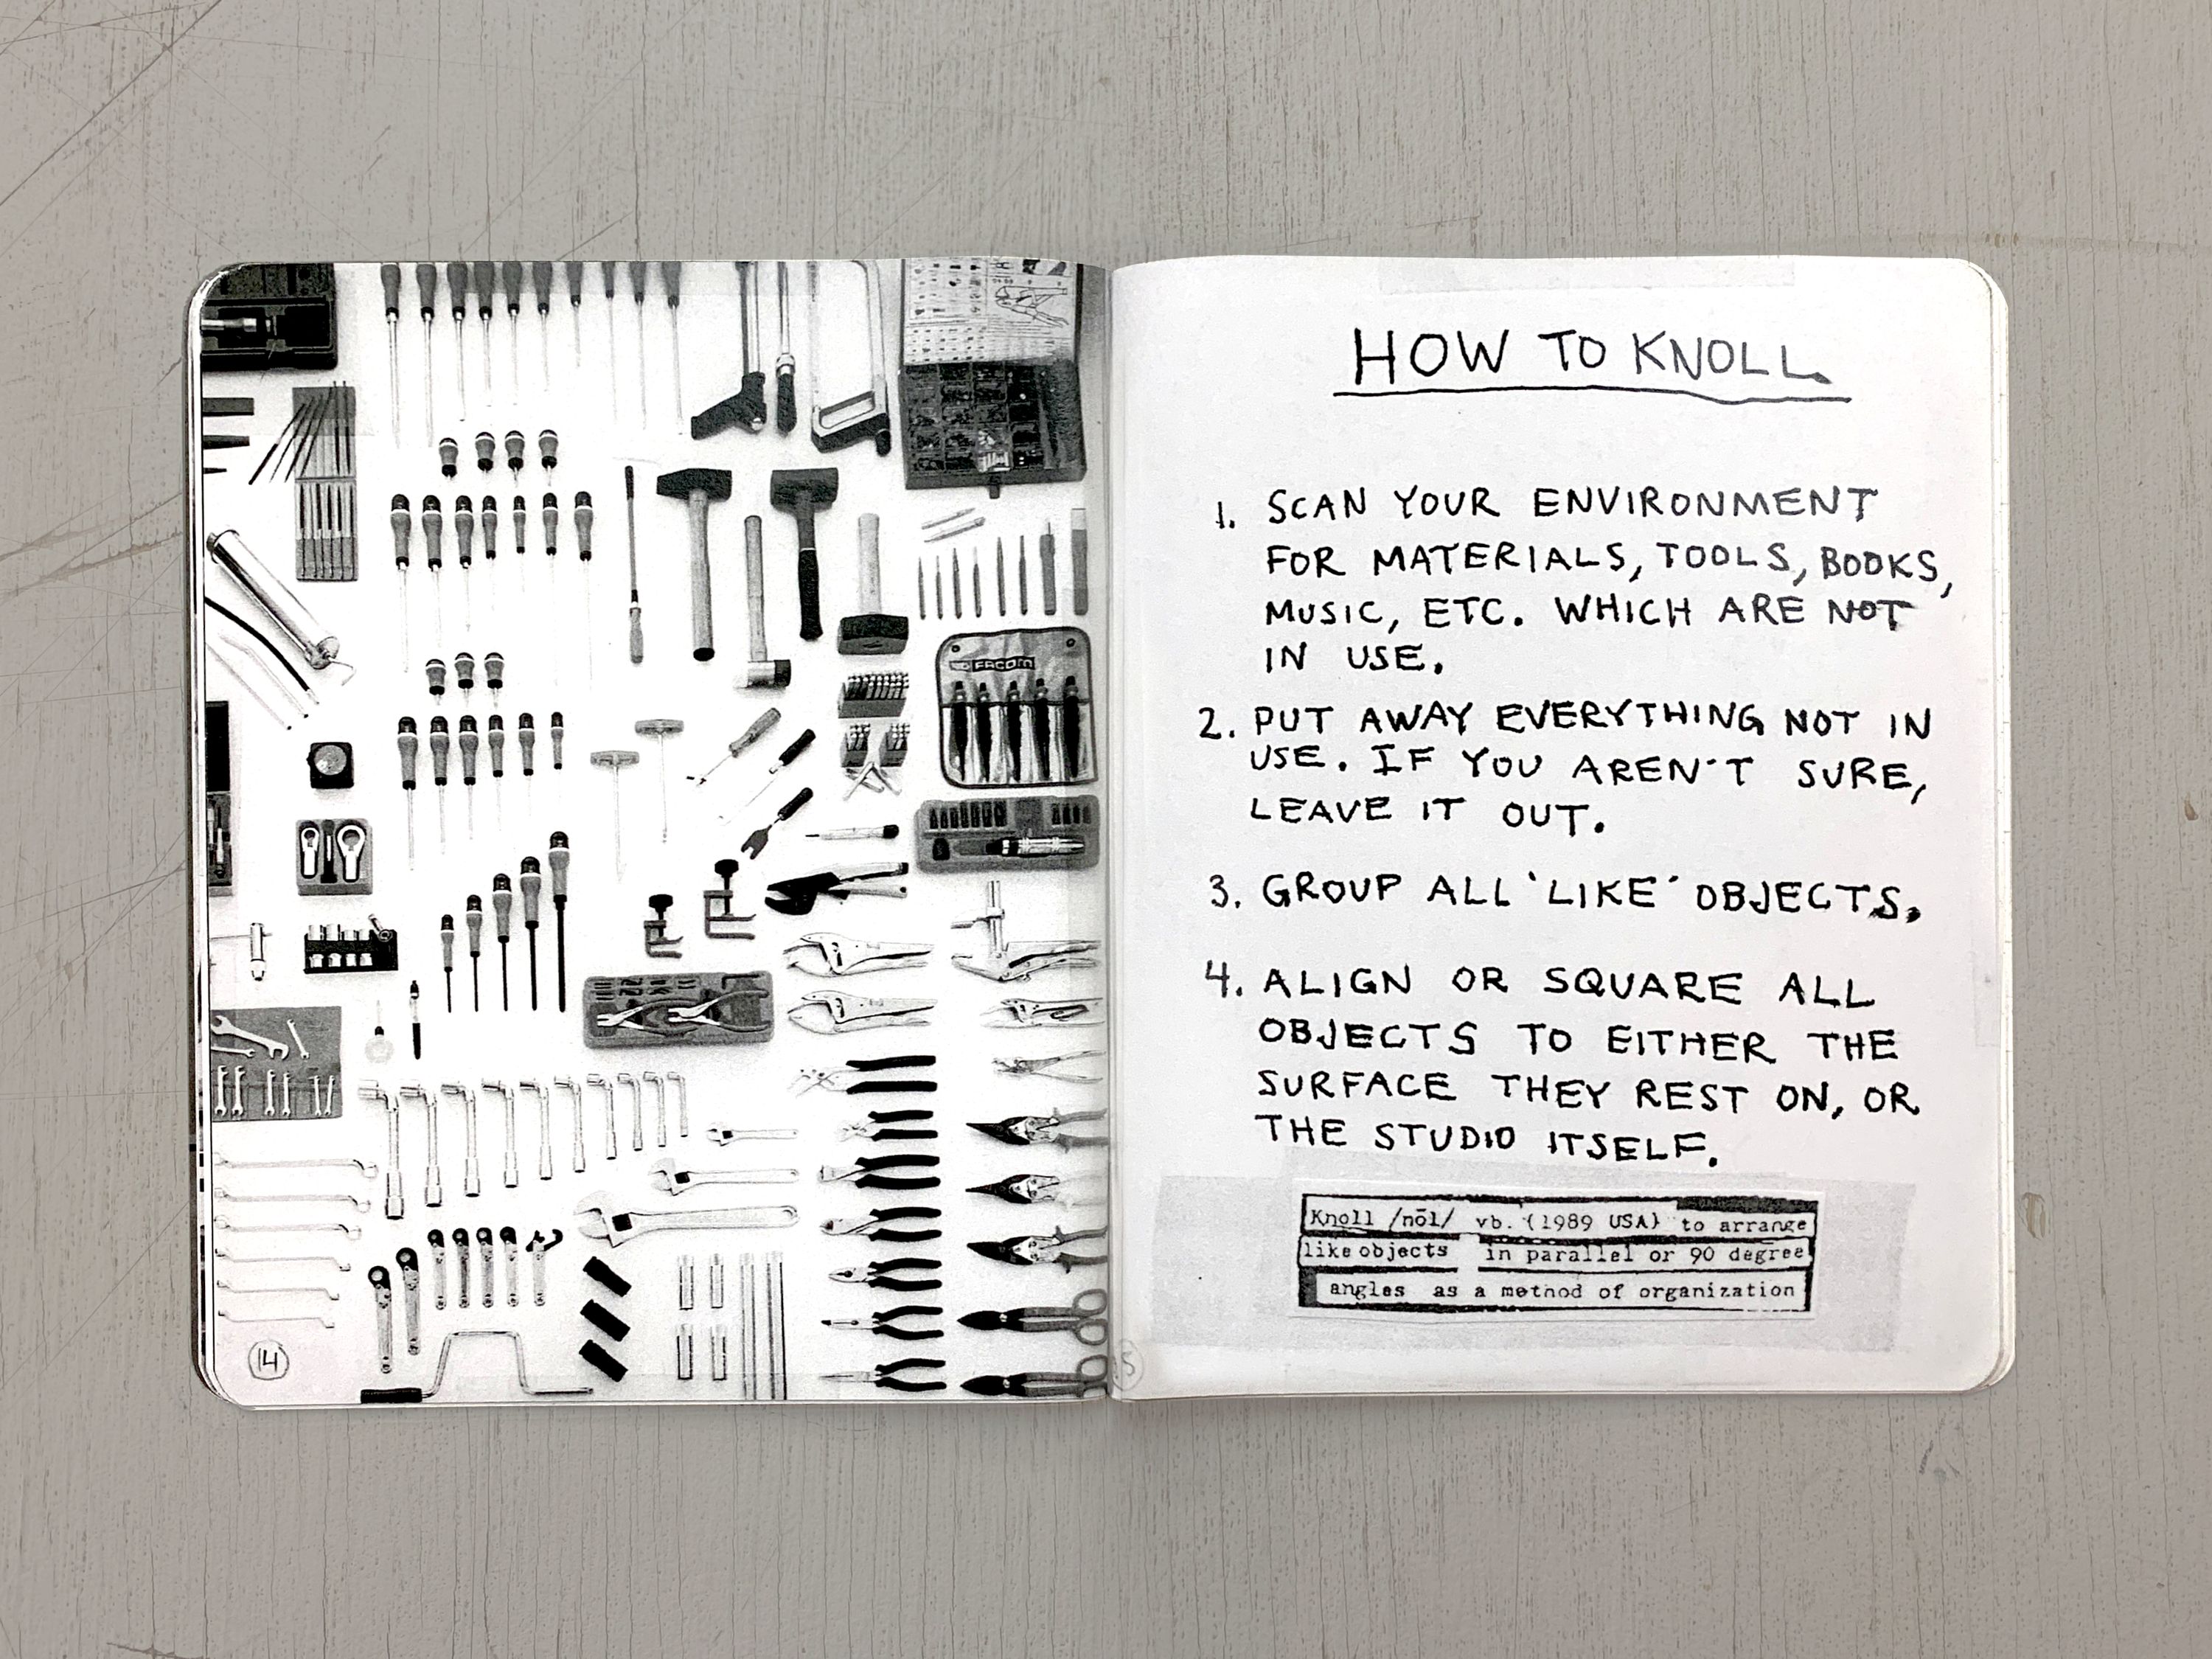 How to Knoll by Tom Sachs from his Ten Bullets Zine.